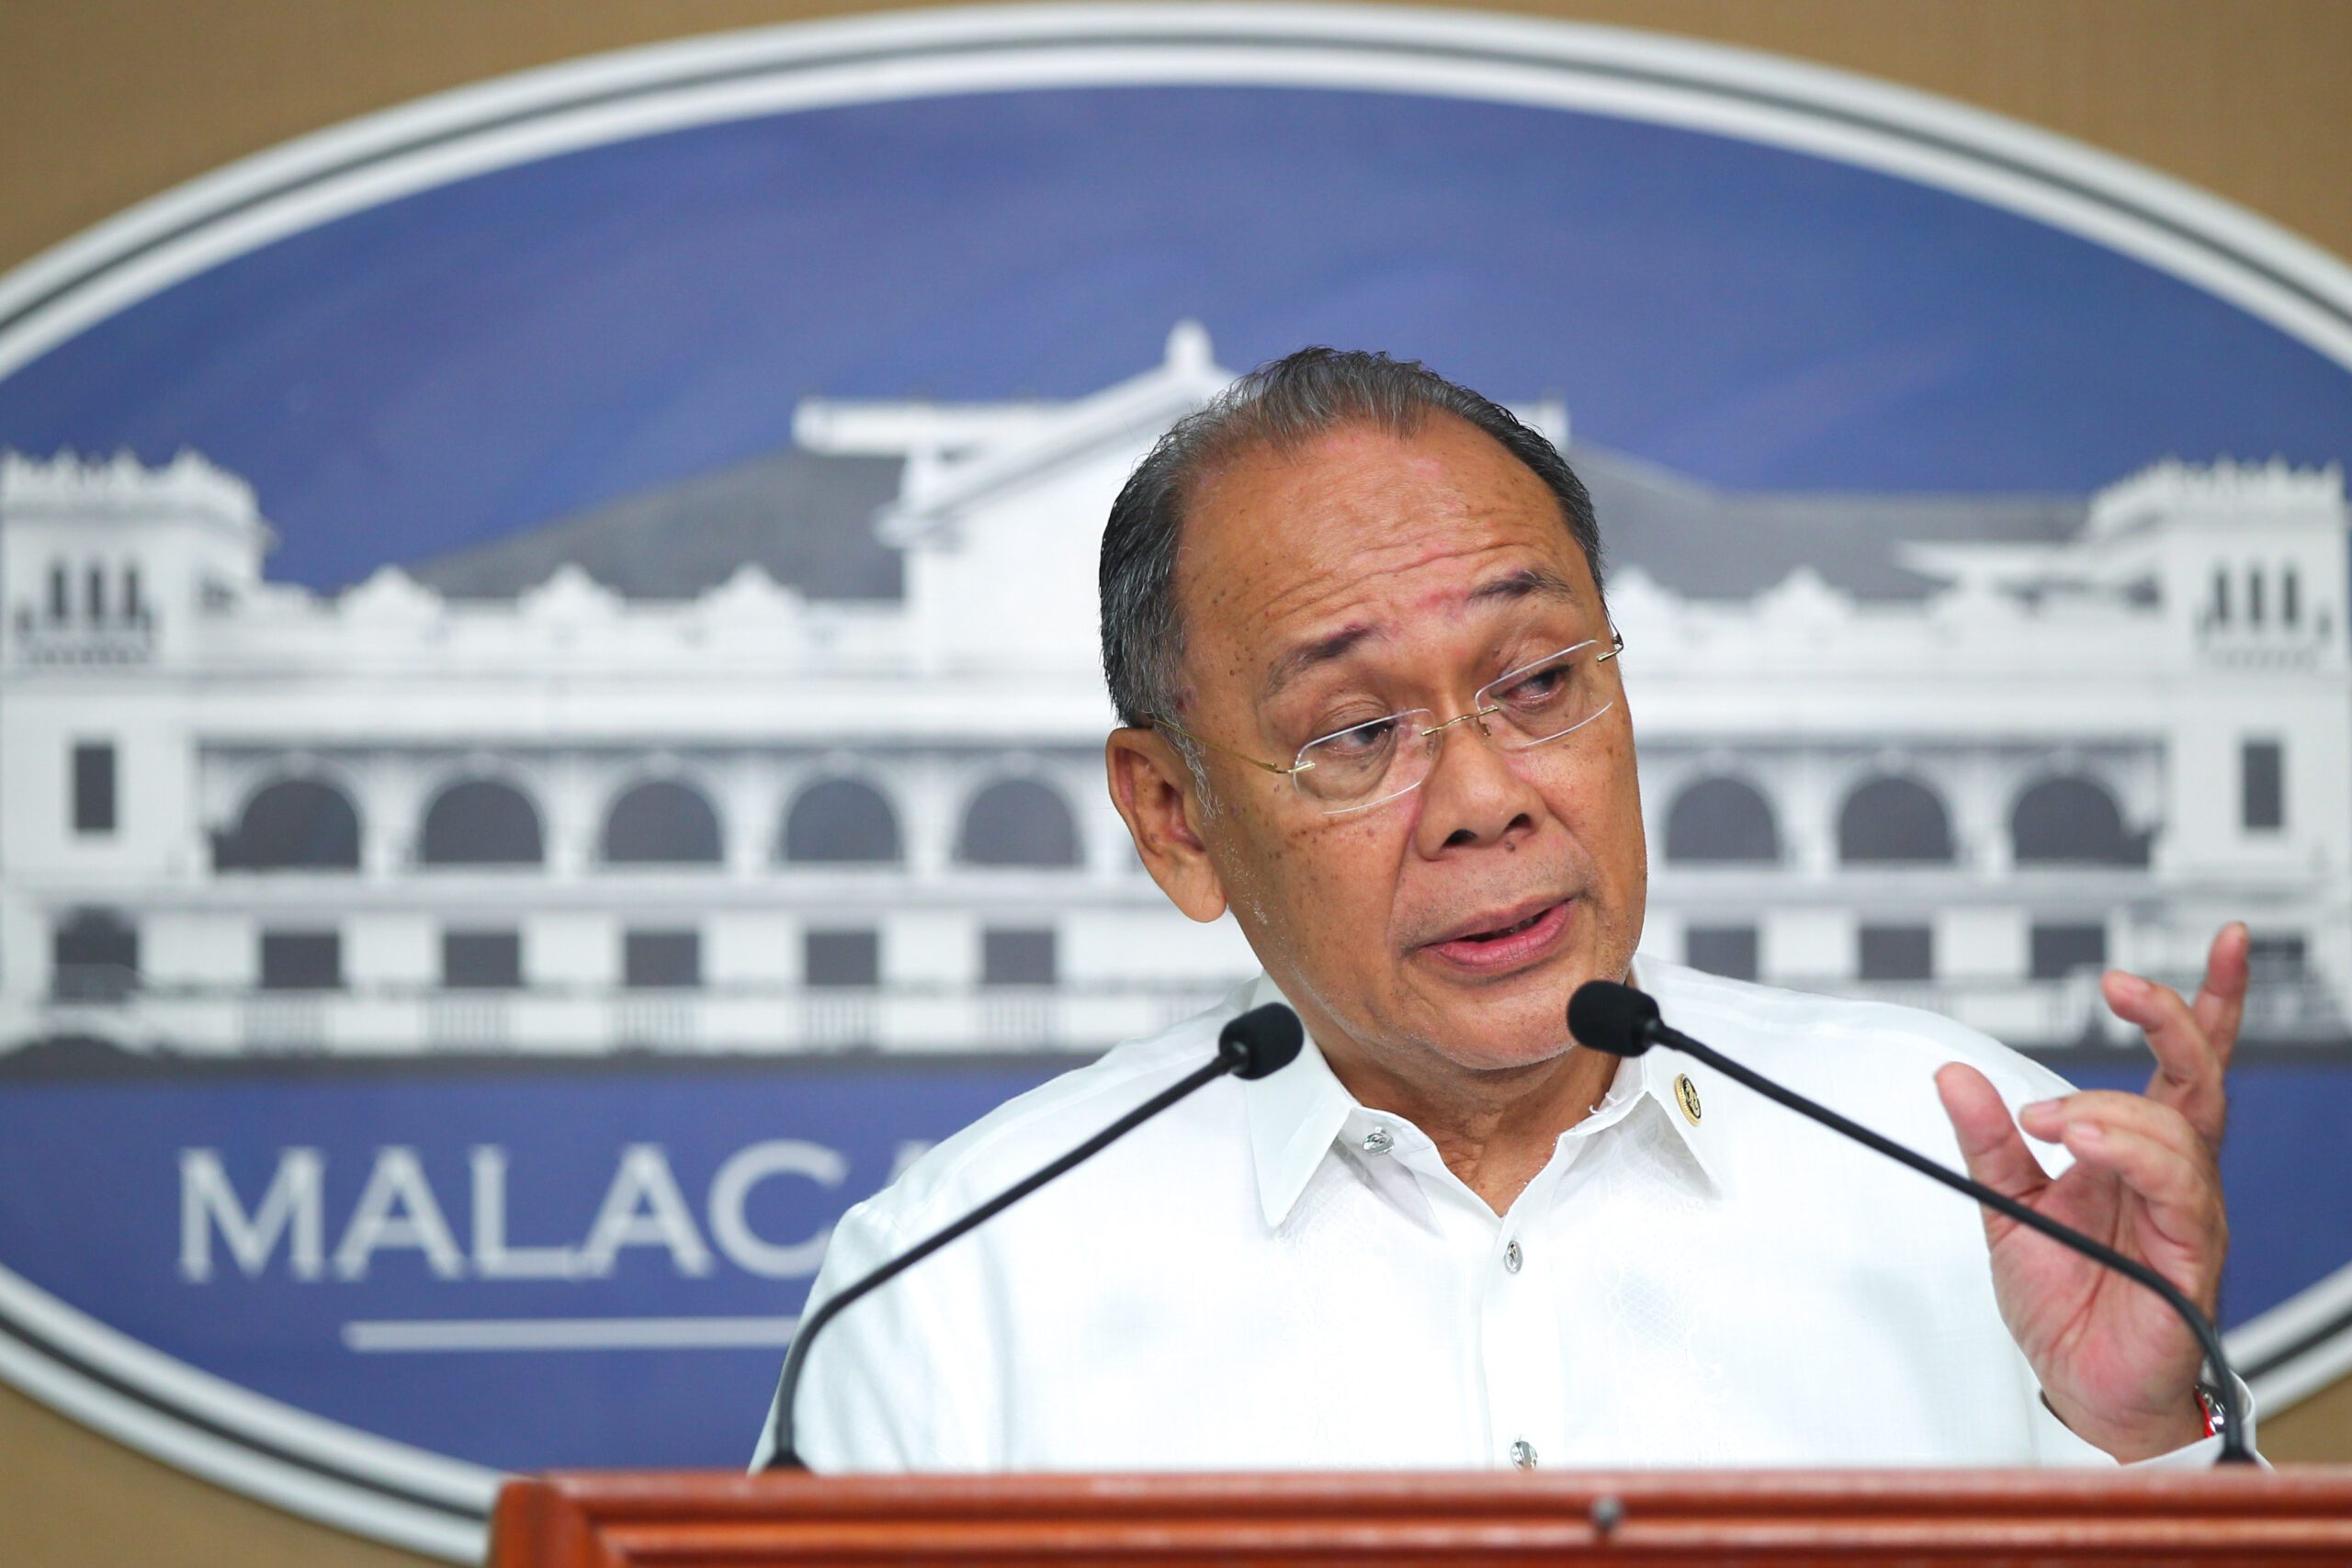 Palace dismisses NY Times journalists as ‘hack writers’